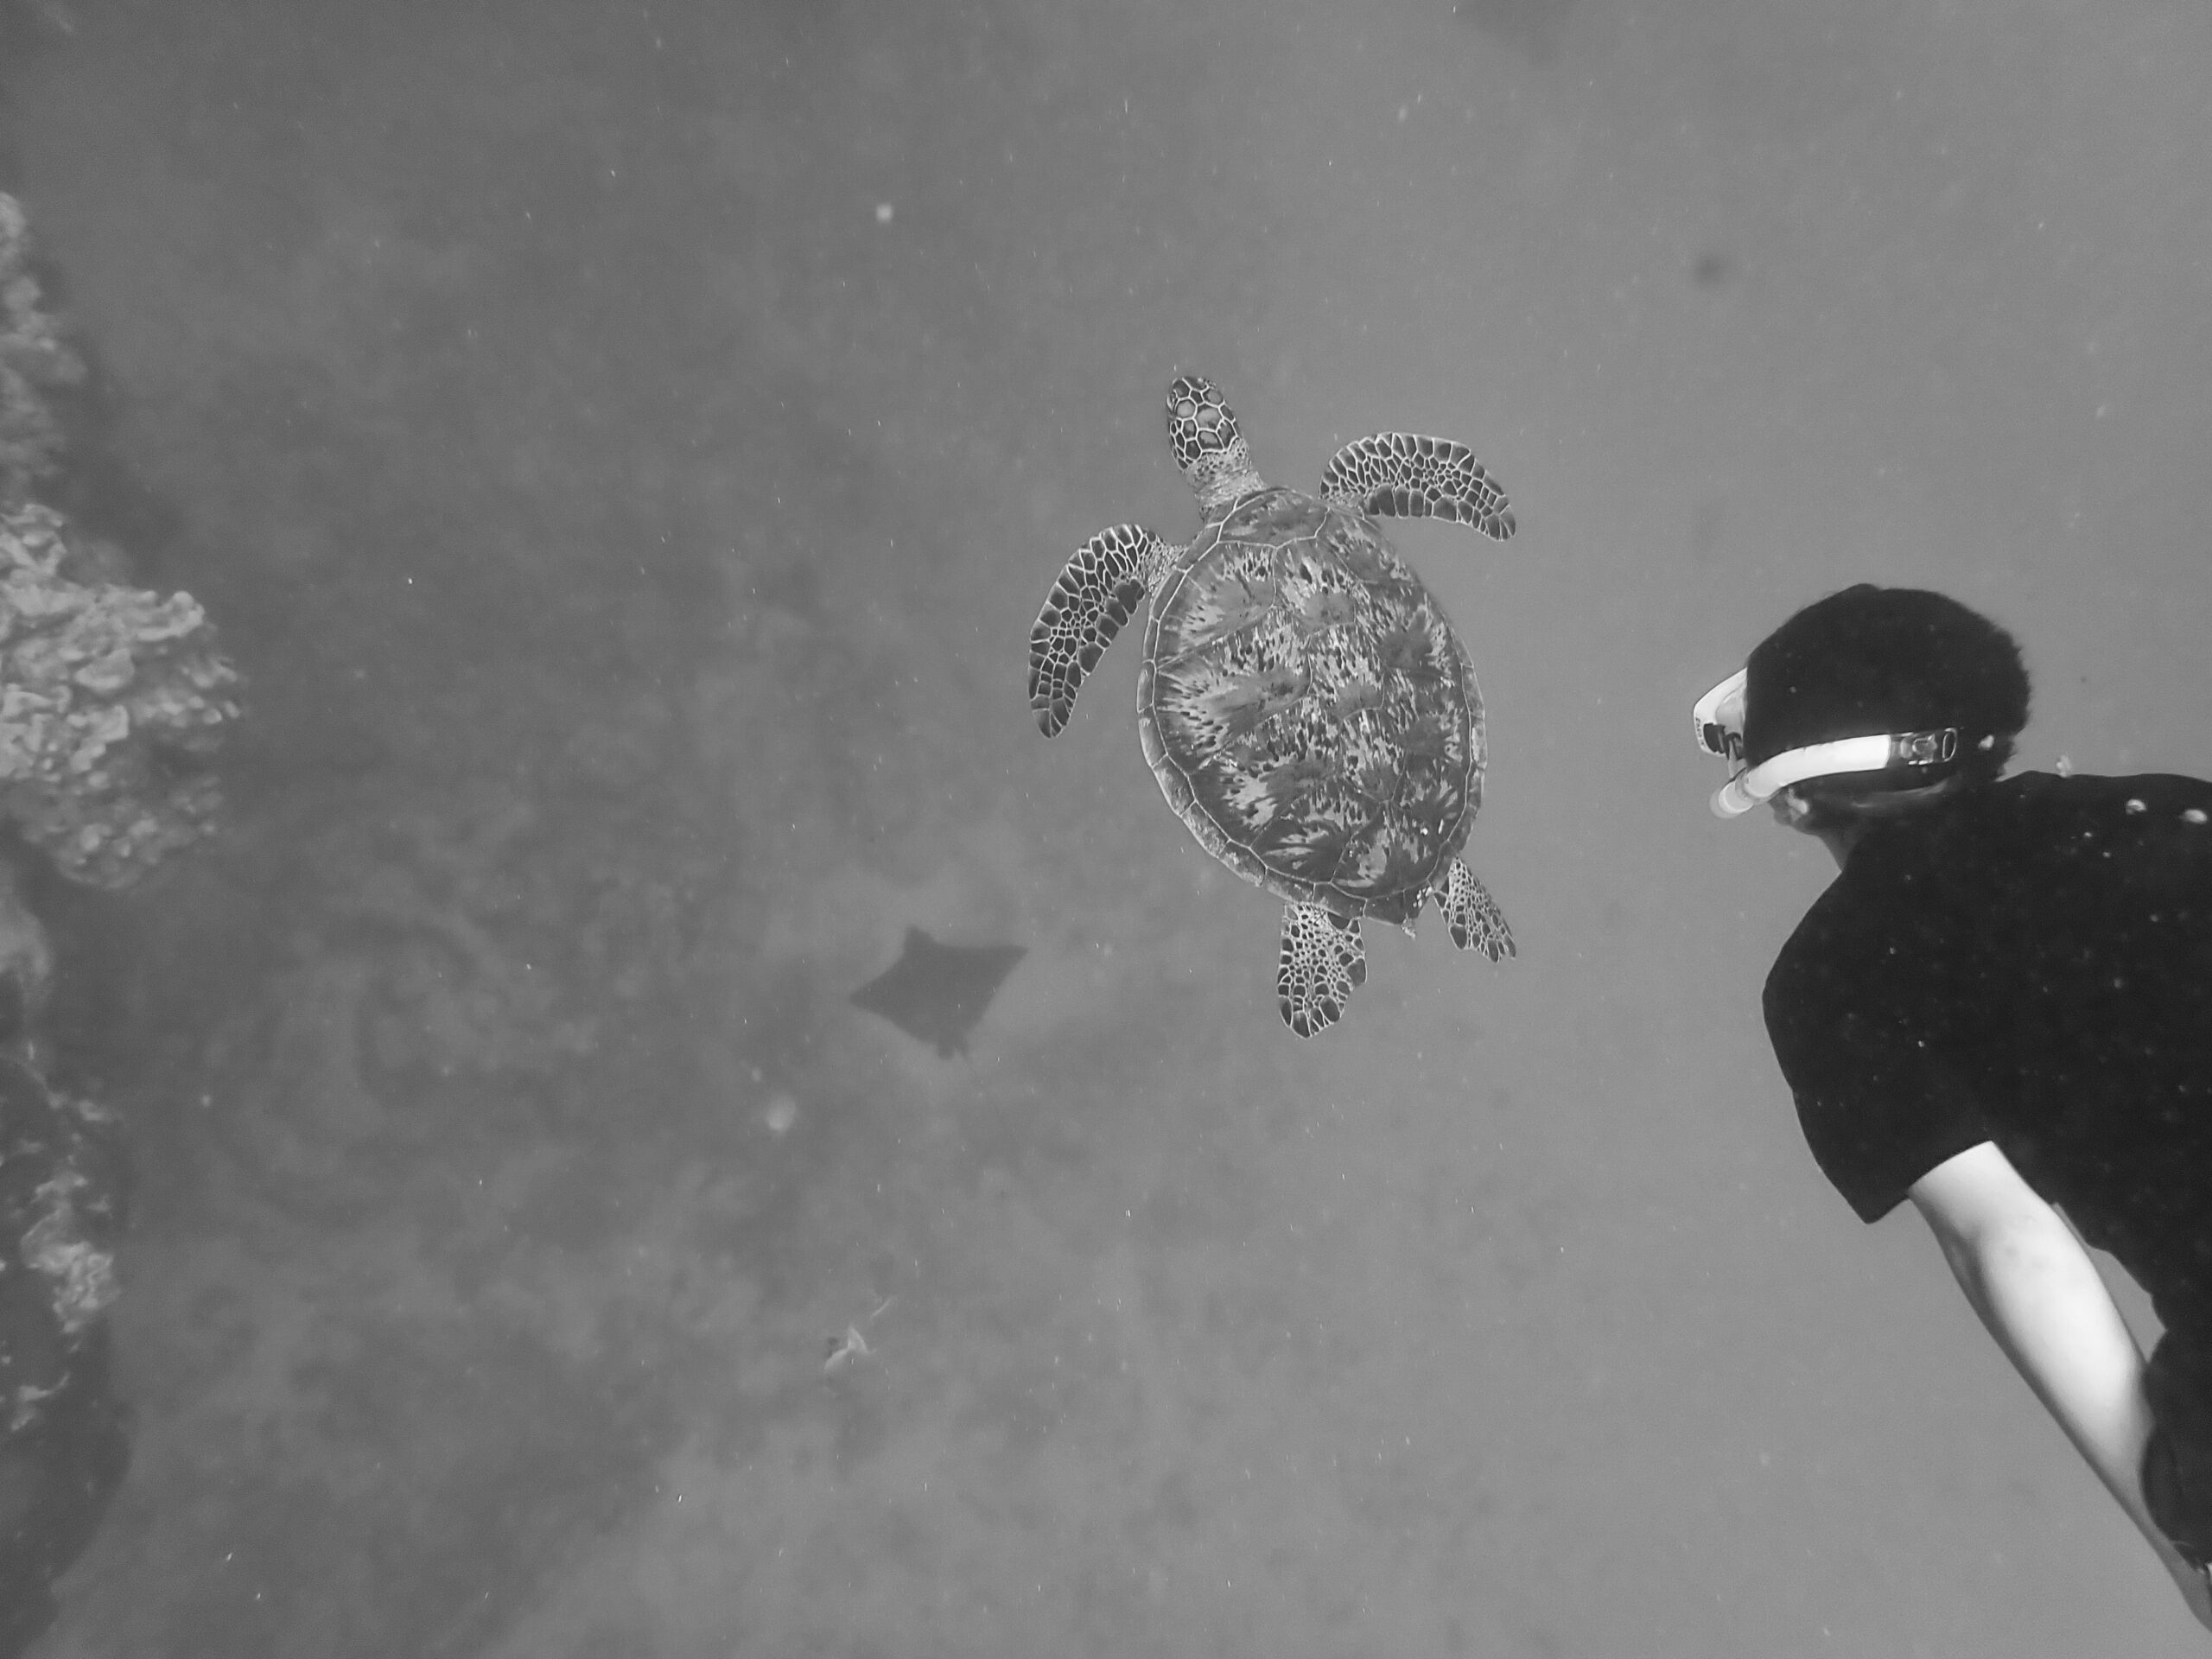 Te Ipukarea Society: Citizen science turtle monitoring continues